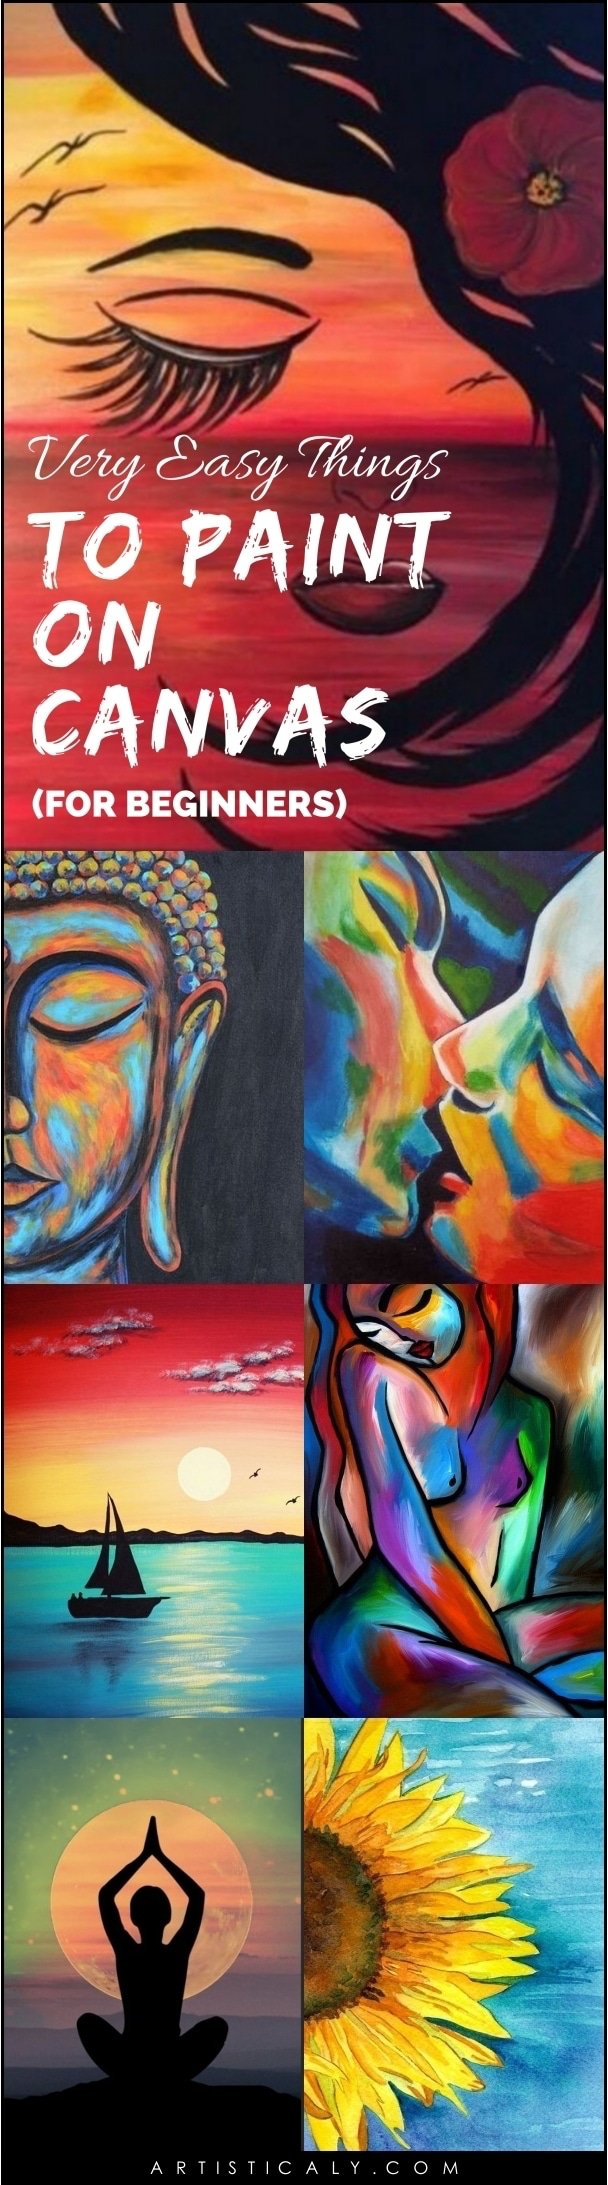 Very-Easy-Things-To-Paint-On-Canvas-For-Beginners